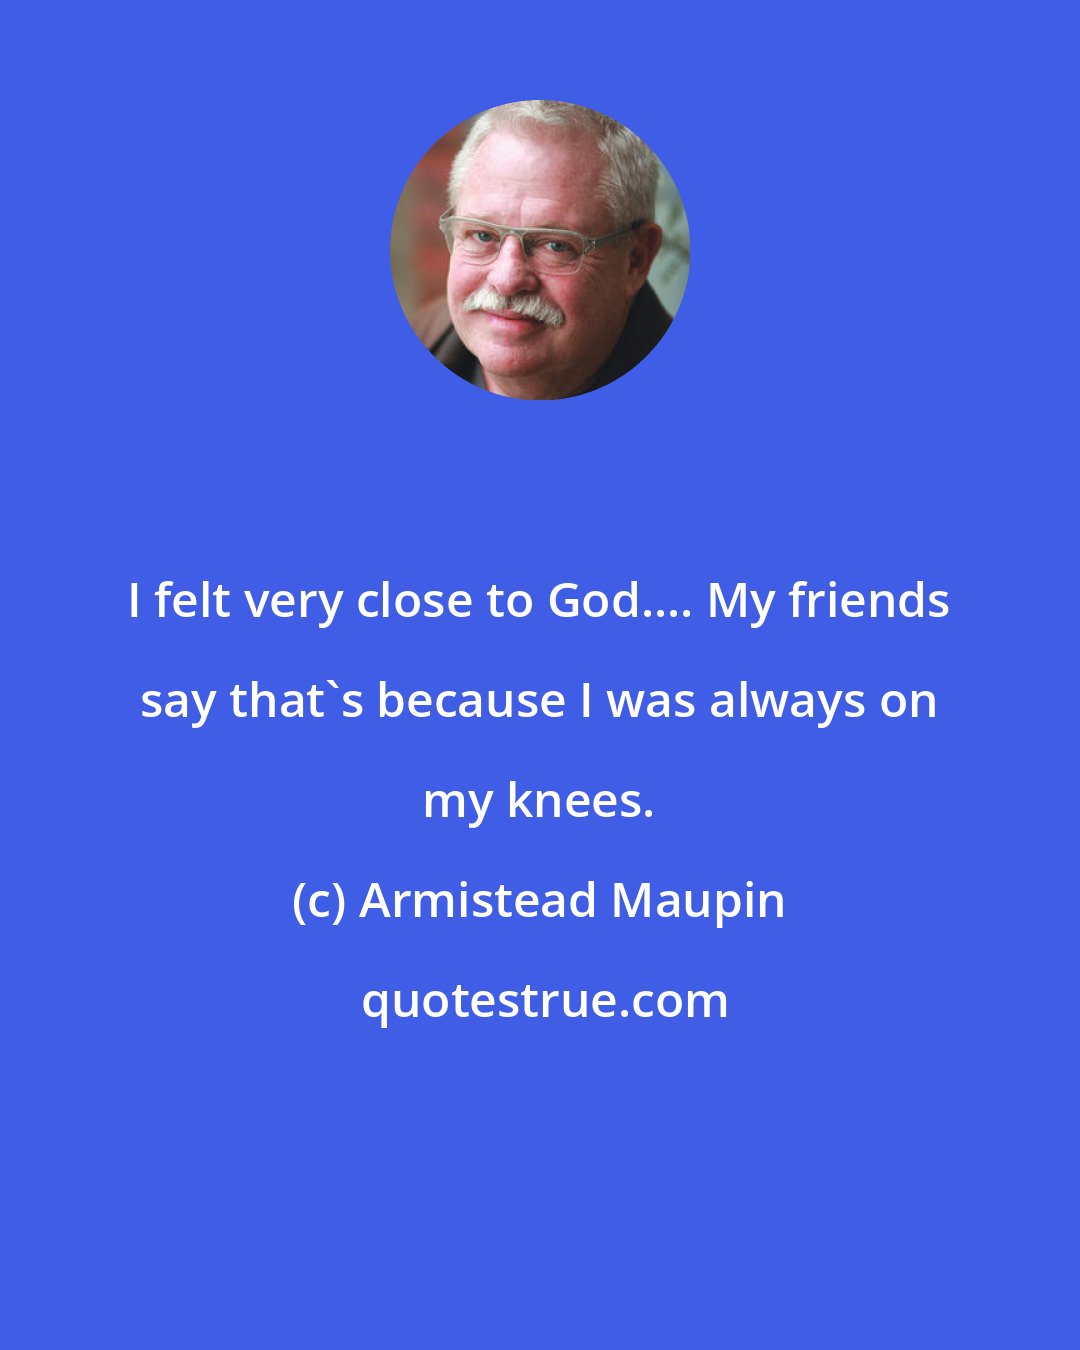 Armistead Maupin: I felt very close to God.... My friends say that's because I was always on my knees.